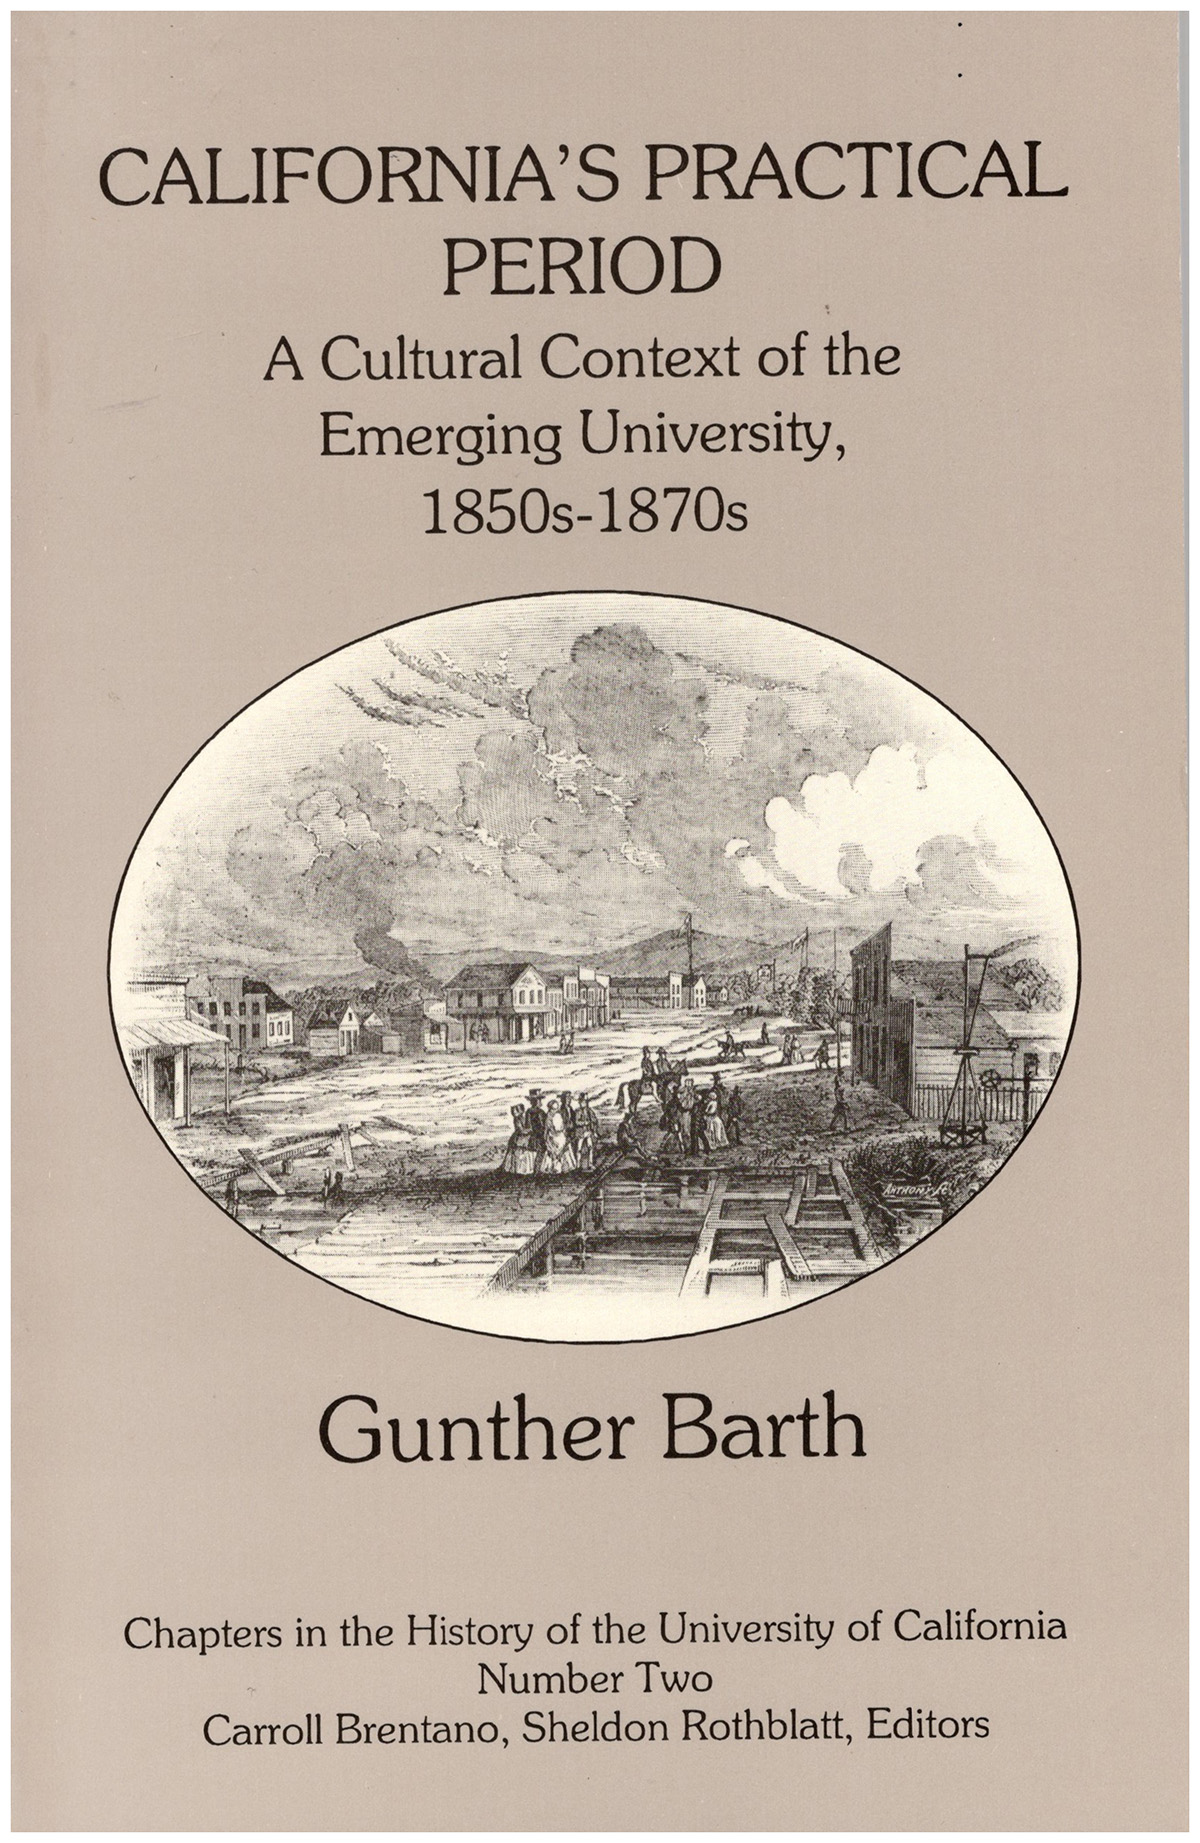 Barth, Gunther - California's Practical Period: A Cultural Context of the Emerging University, 1850s-1870s